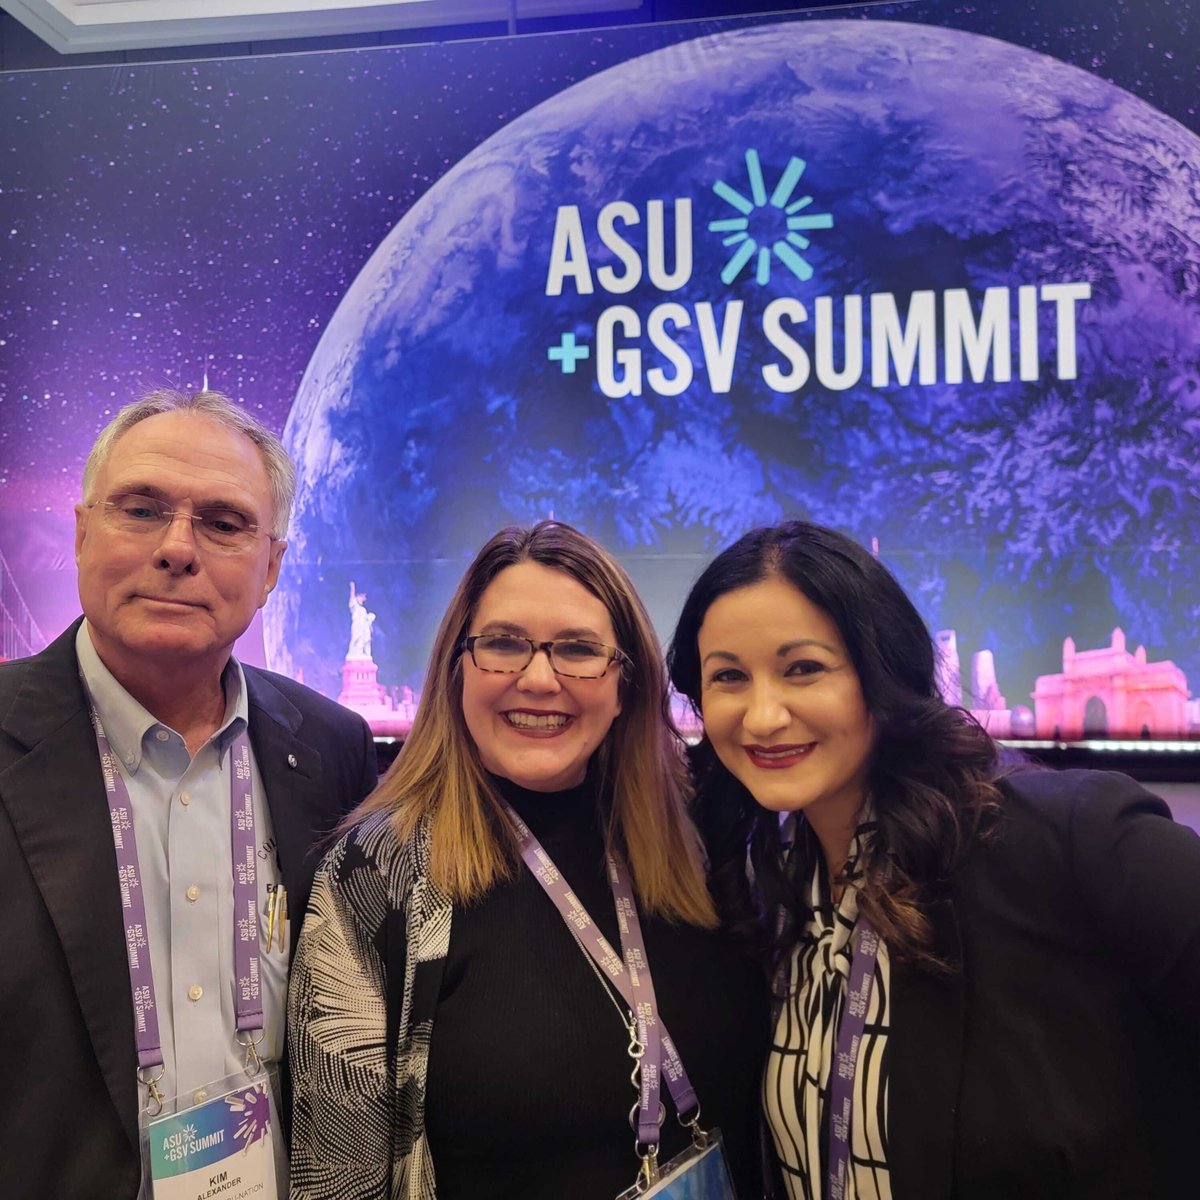 One {big} step for CEN, one huge leap for rural education. 

We are honored to receive 1st place at the @asugsv Summit Education Innovation Showcase. 

Thank you to our districts, our staff, our stakeholders, and EVERYONE who is supporting us as we put rural education on the map.